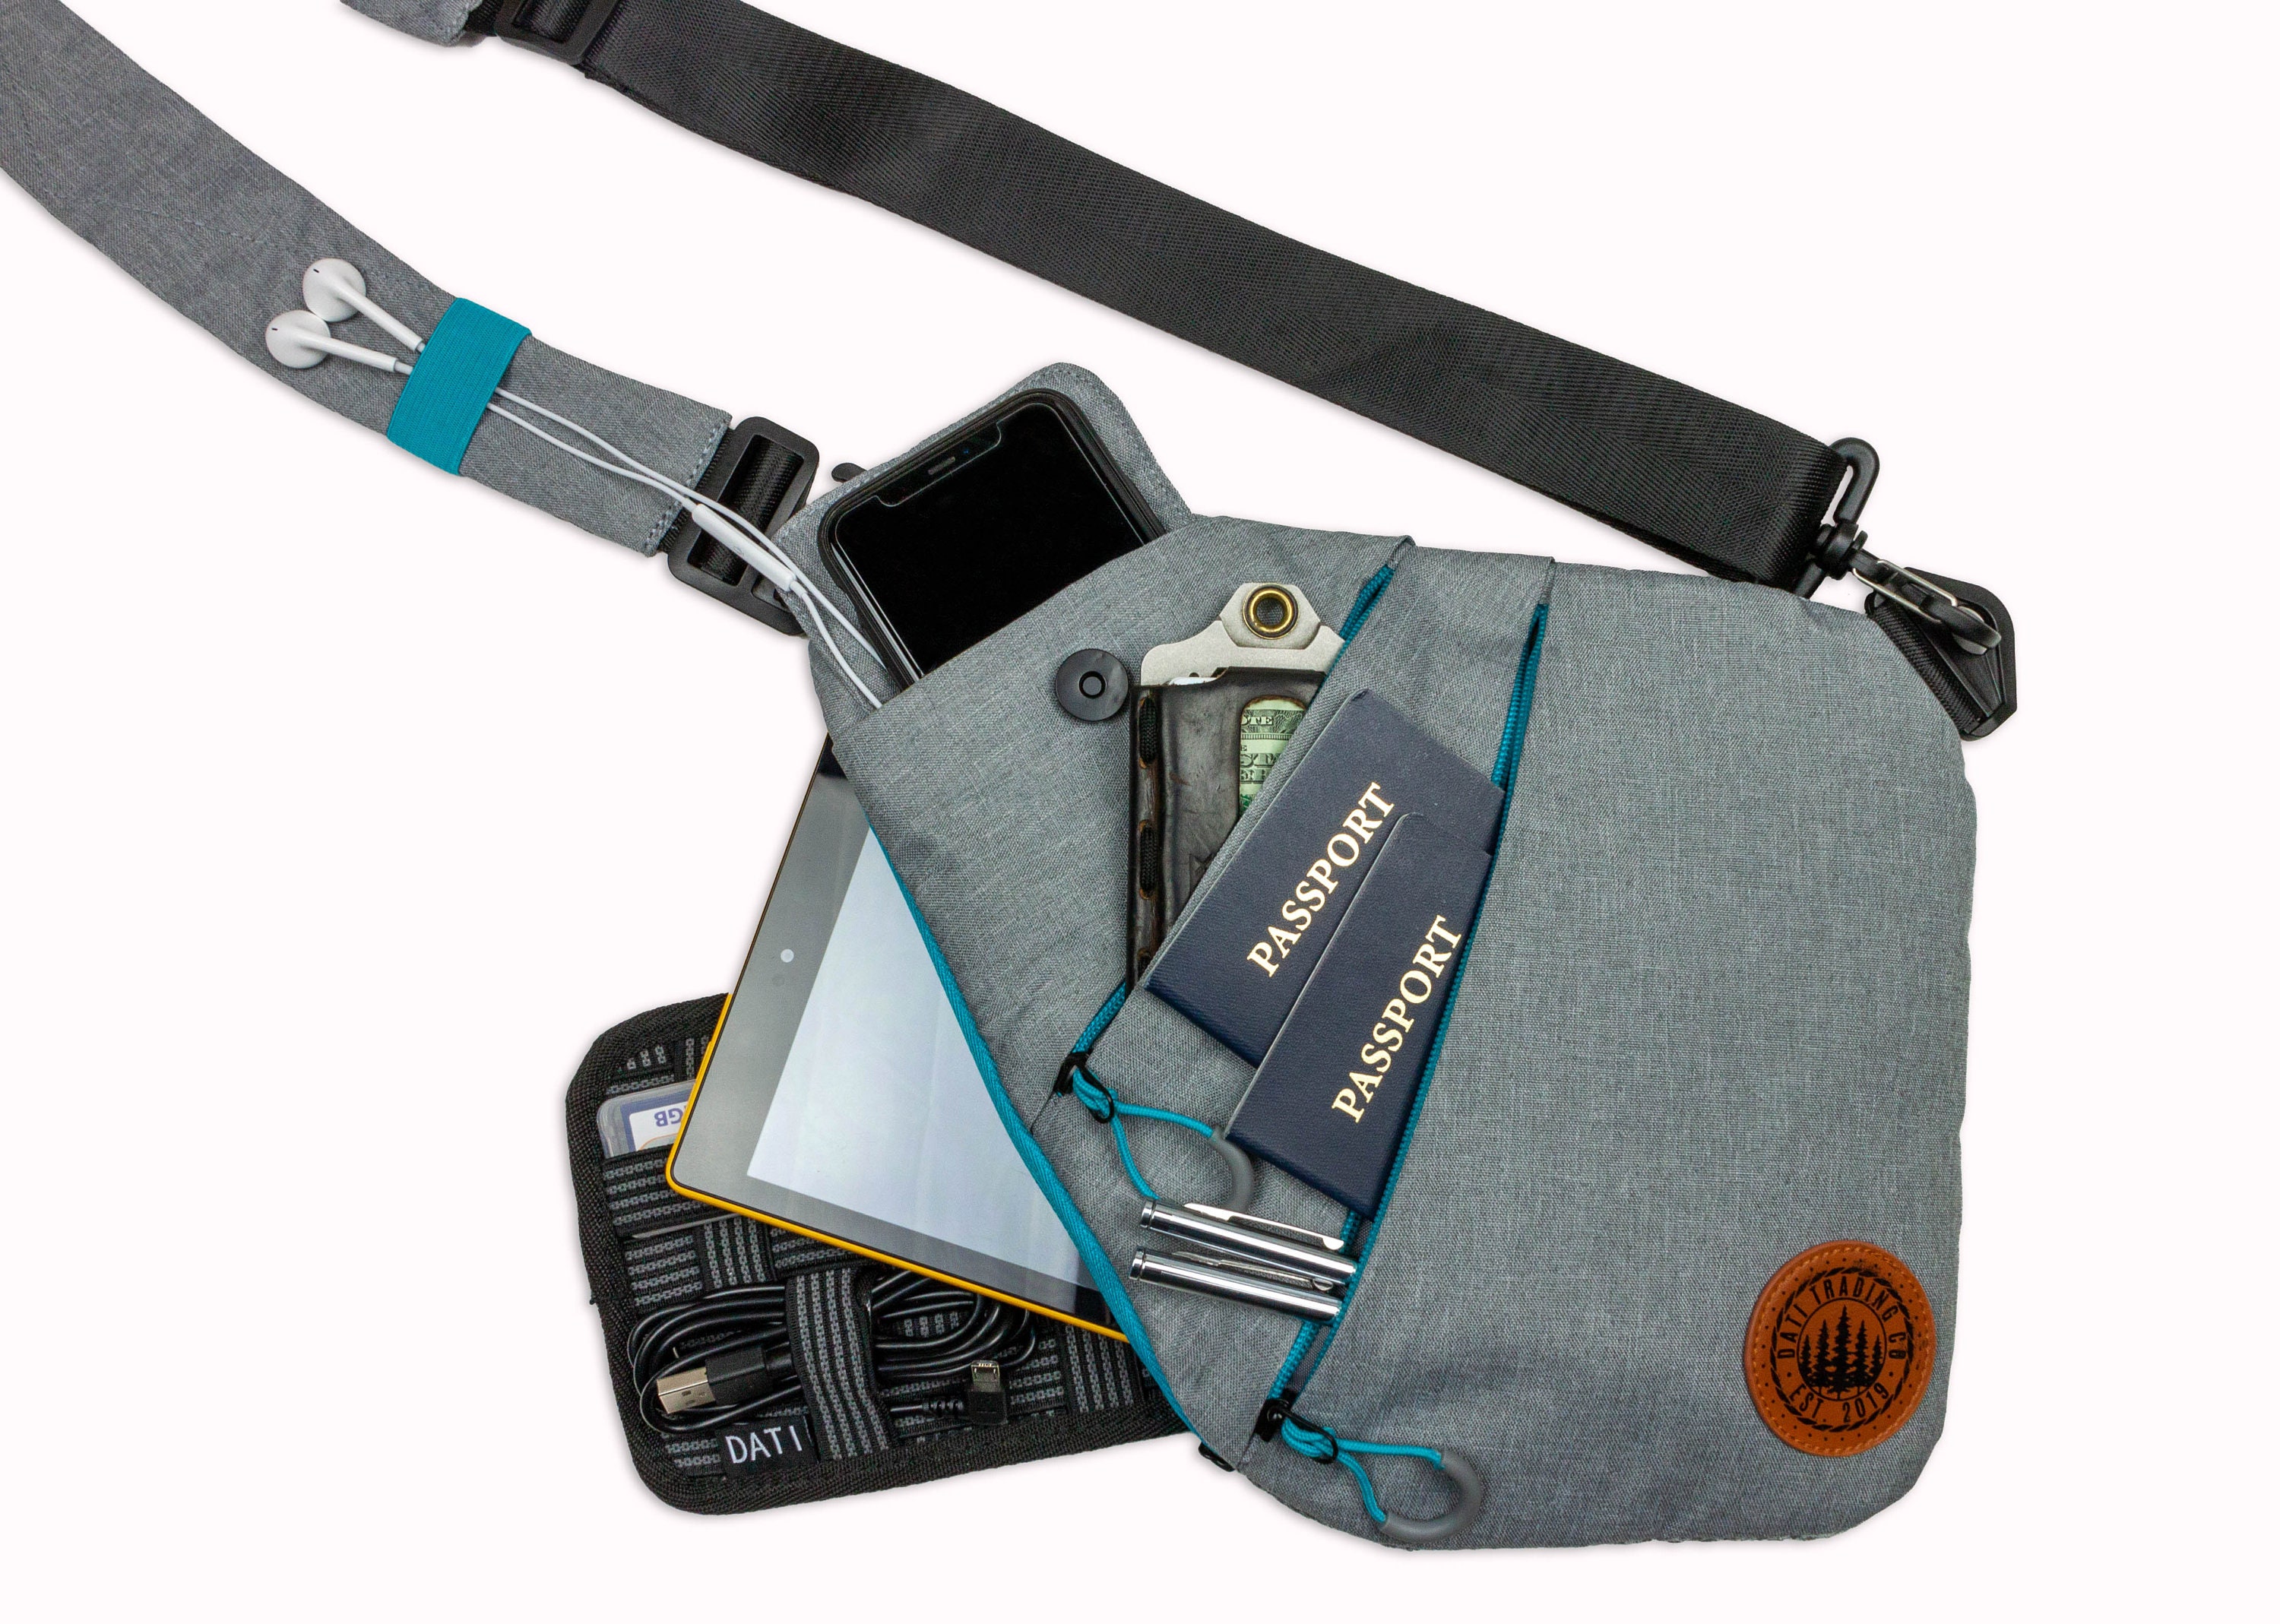 Deal of the Day: Save $40 on Lowepro Passport Sling Camera Bag